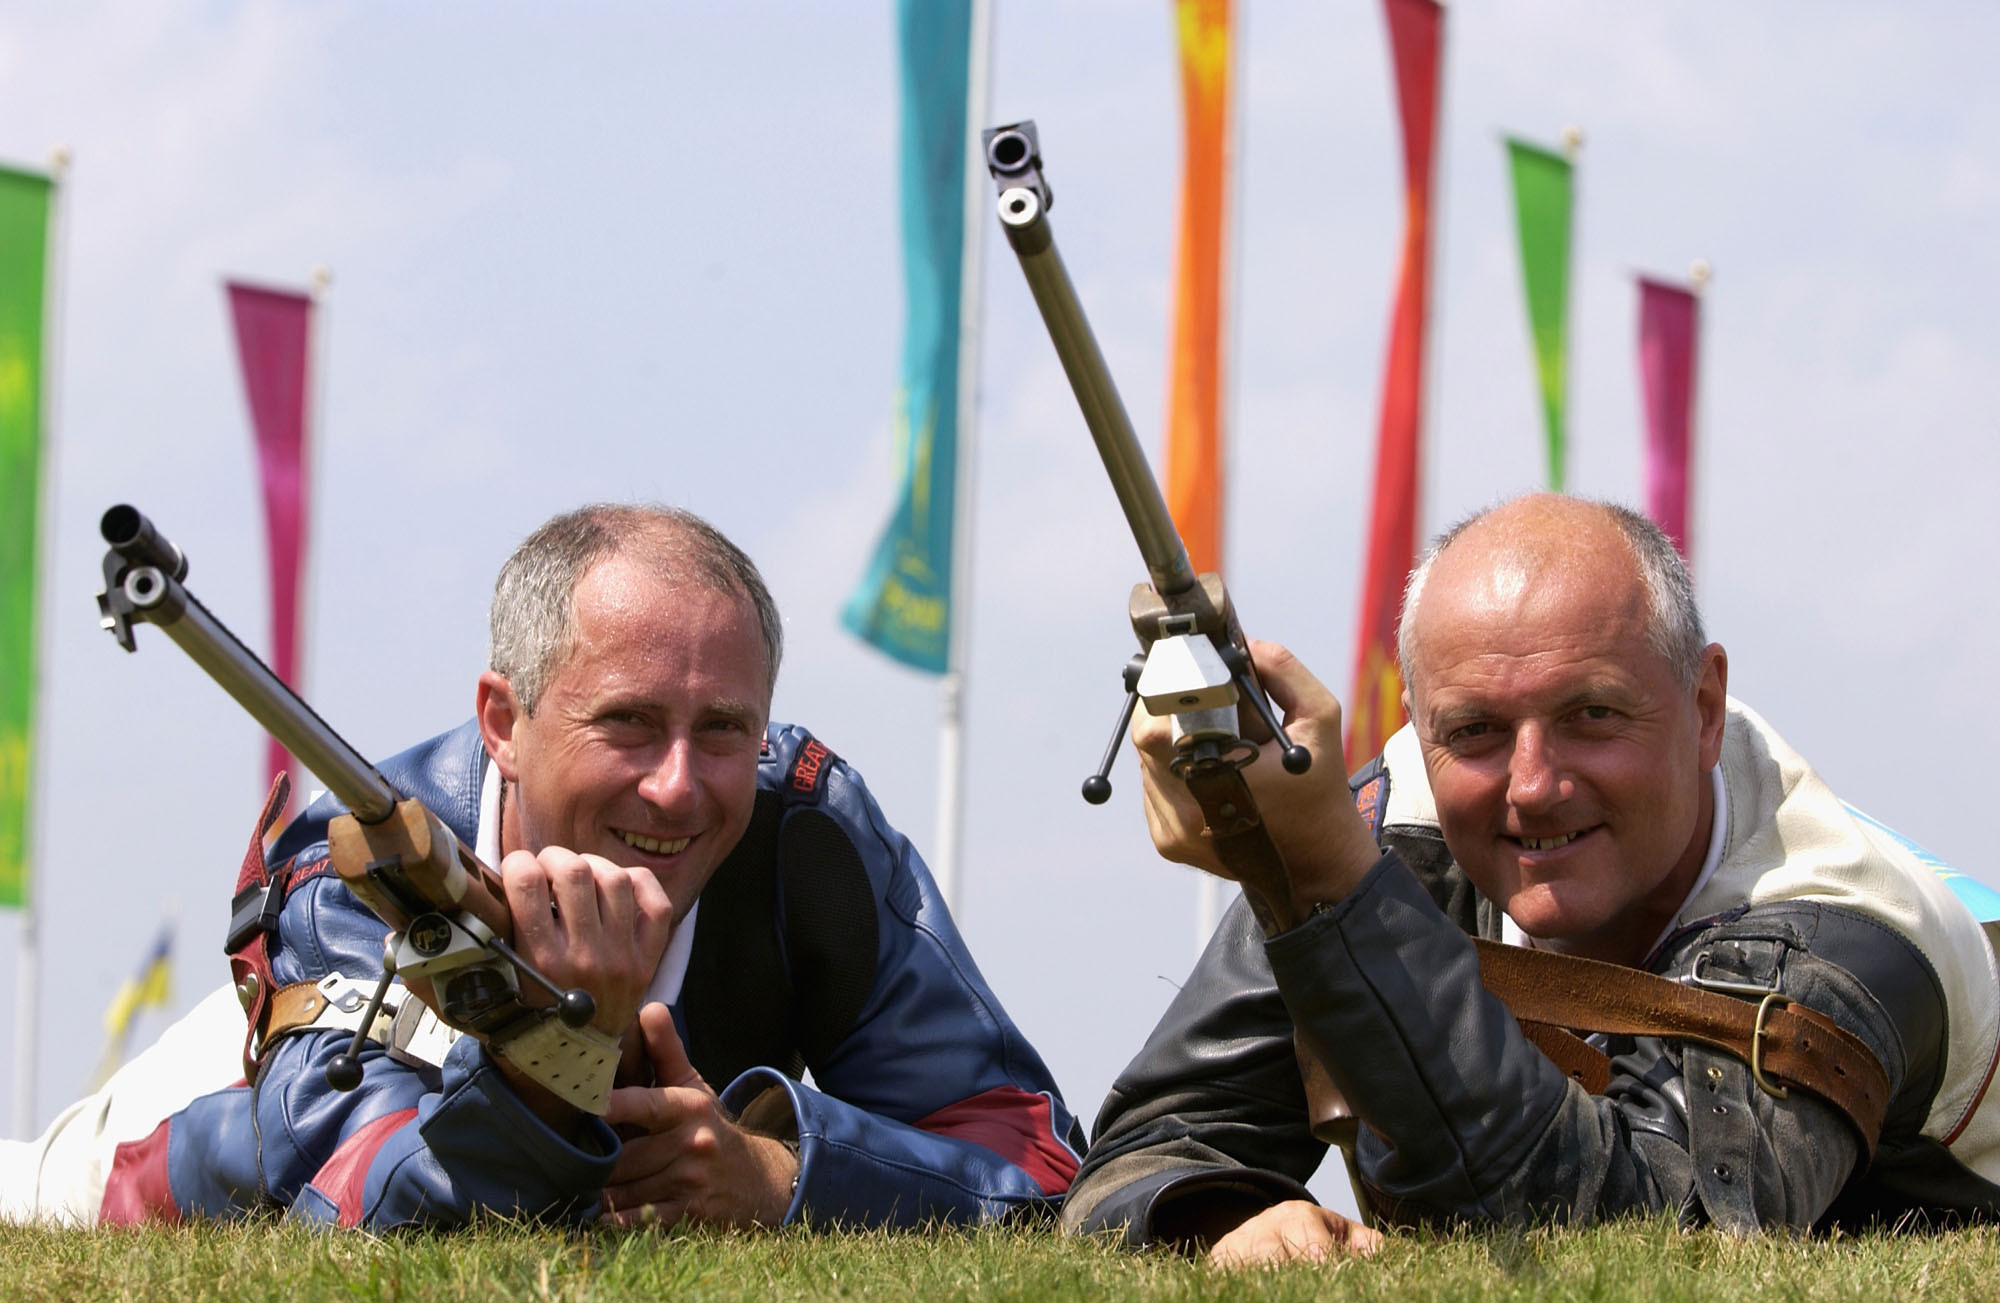 Bisley hosted shooting when Manchester staged the 2002 Commonwealth Games, when Northern Ireland's David Calvert, right, and partner Martin Millar, left, won the gold medal in the open full bore rifle pairs ©Getty Images